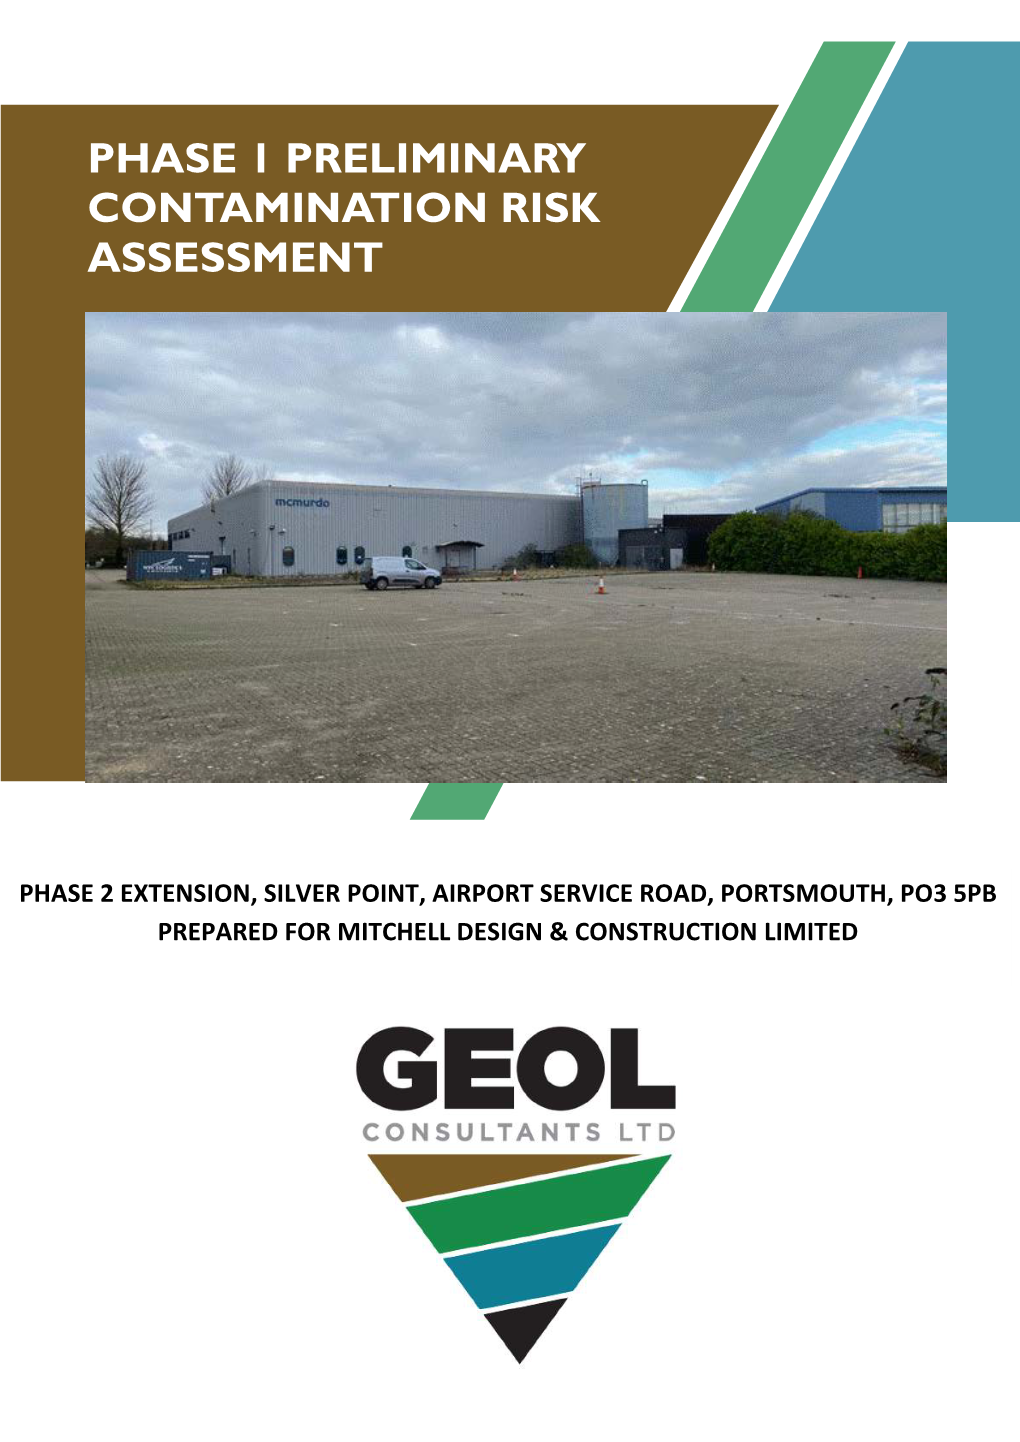 Phase 1 Preliminary Contamination Risk Assessment